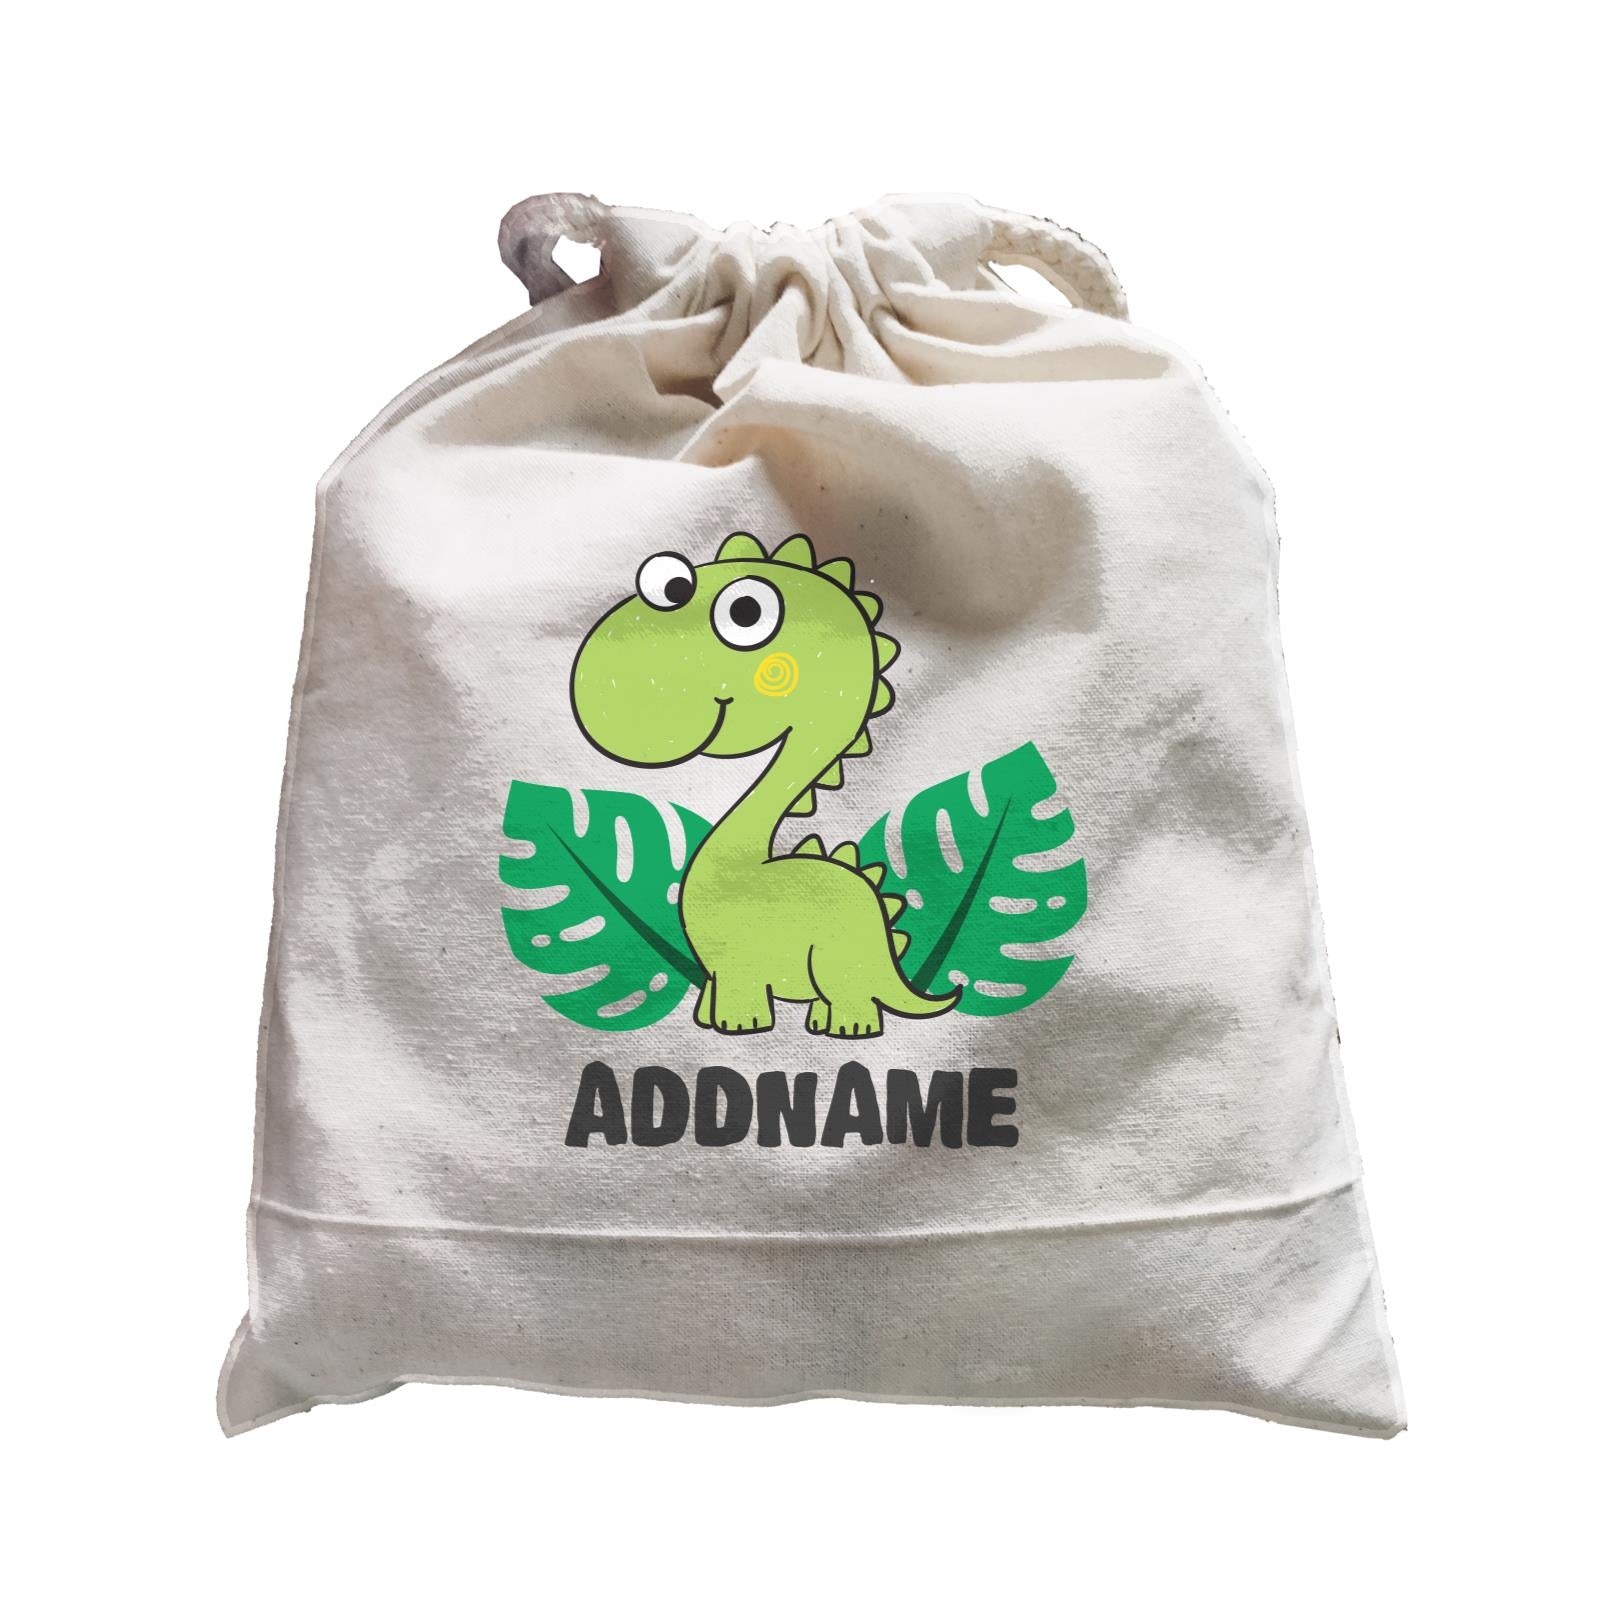 Super Cute Dinosaur With Green Leaves Satchel